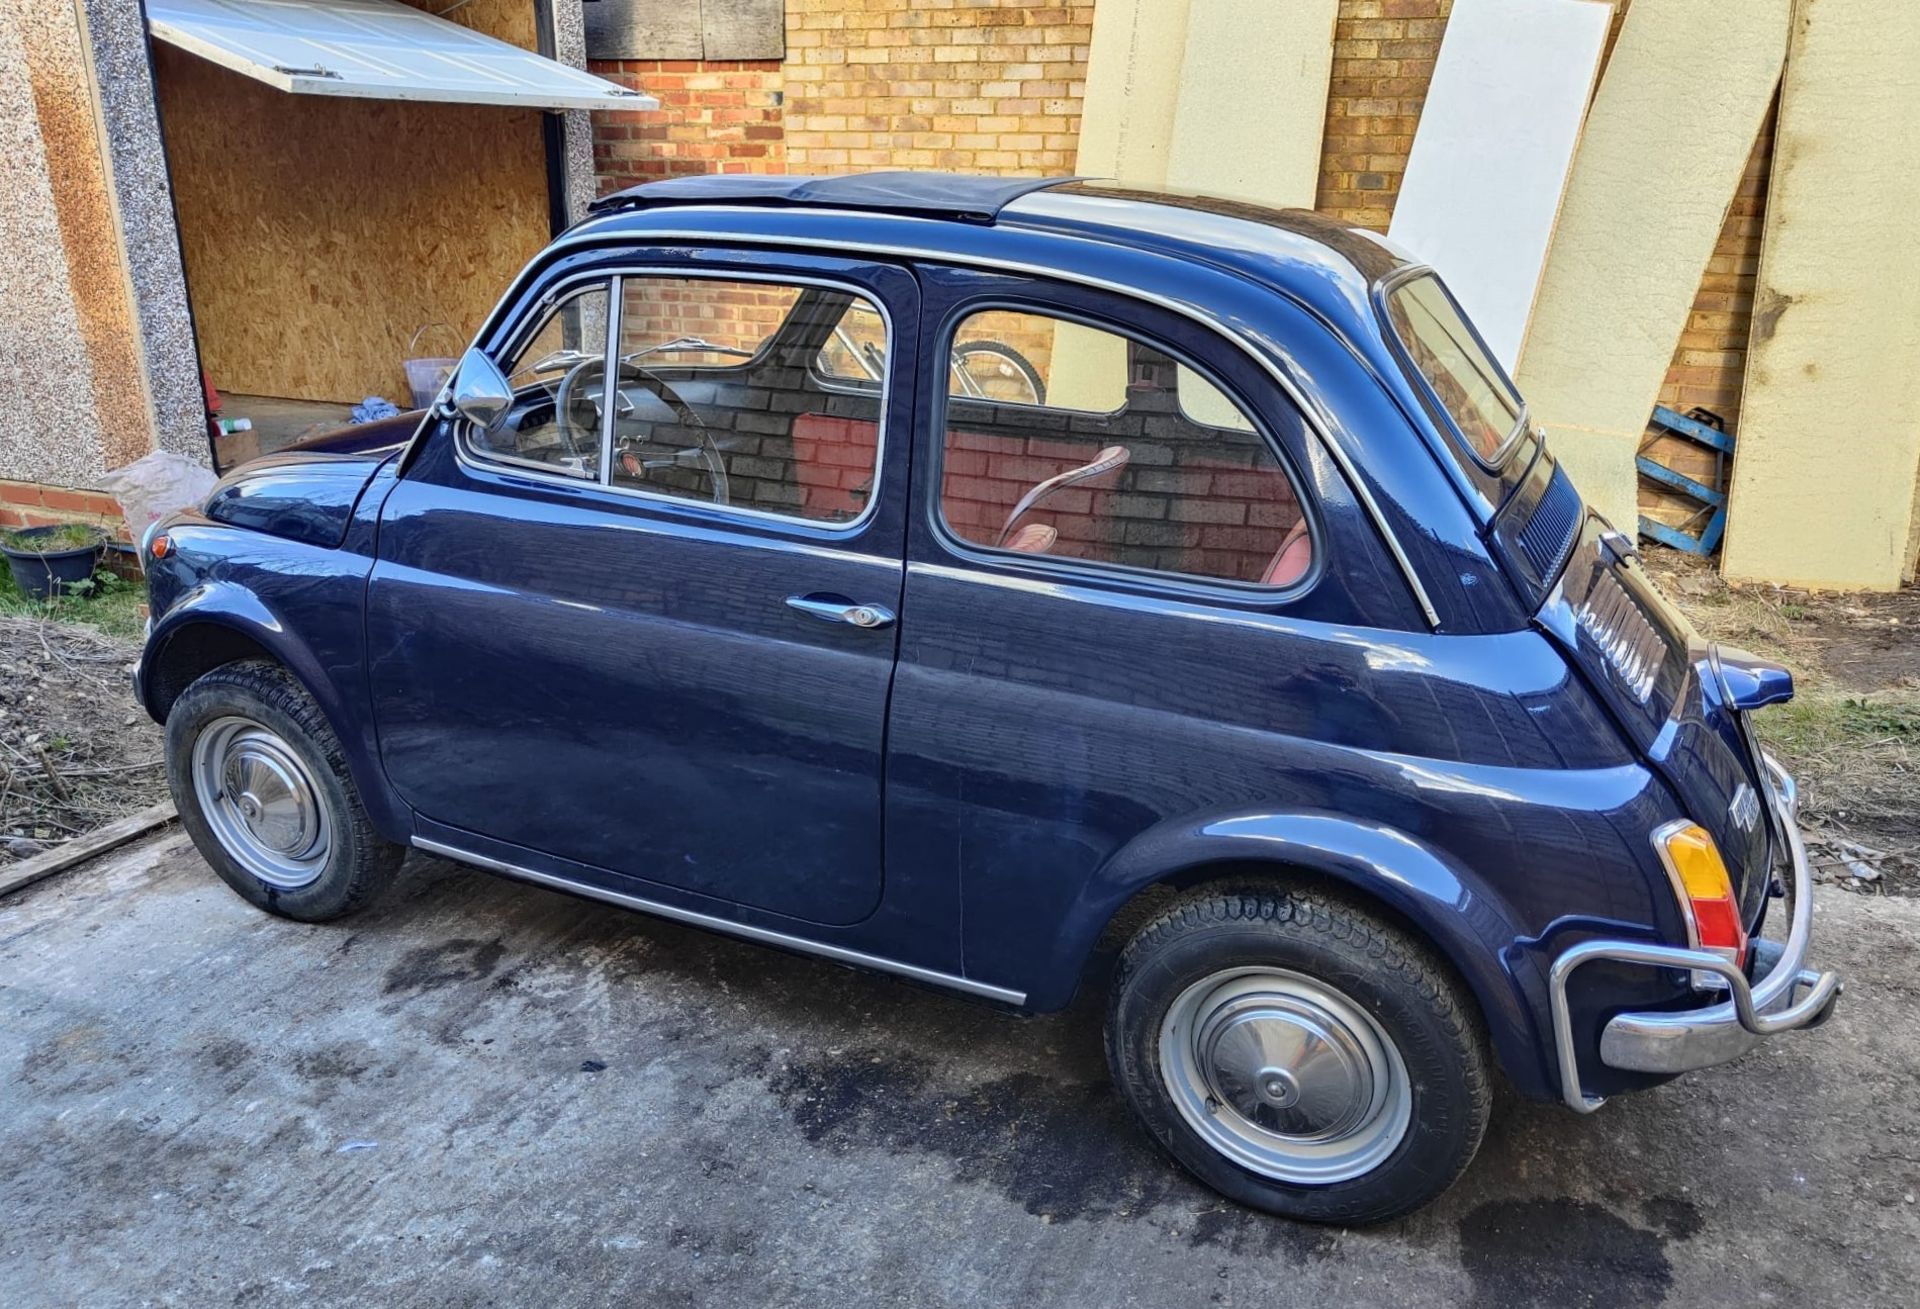 1971 FIAT 500L SALOON Registration Number: JBY 492J Chassis Number: TBA Recorded Mileage: 40,300 - Image 4 of 13